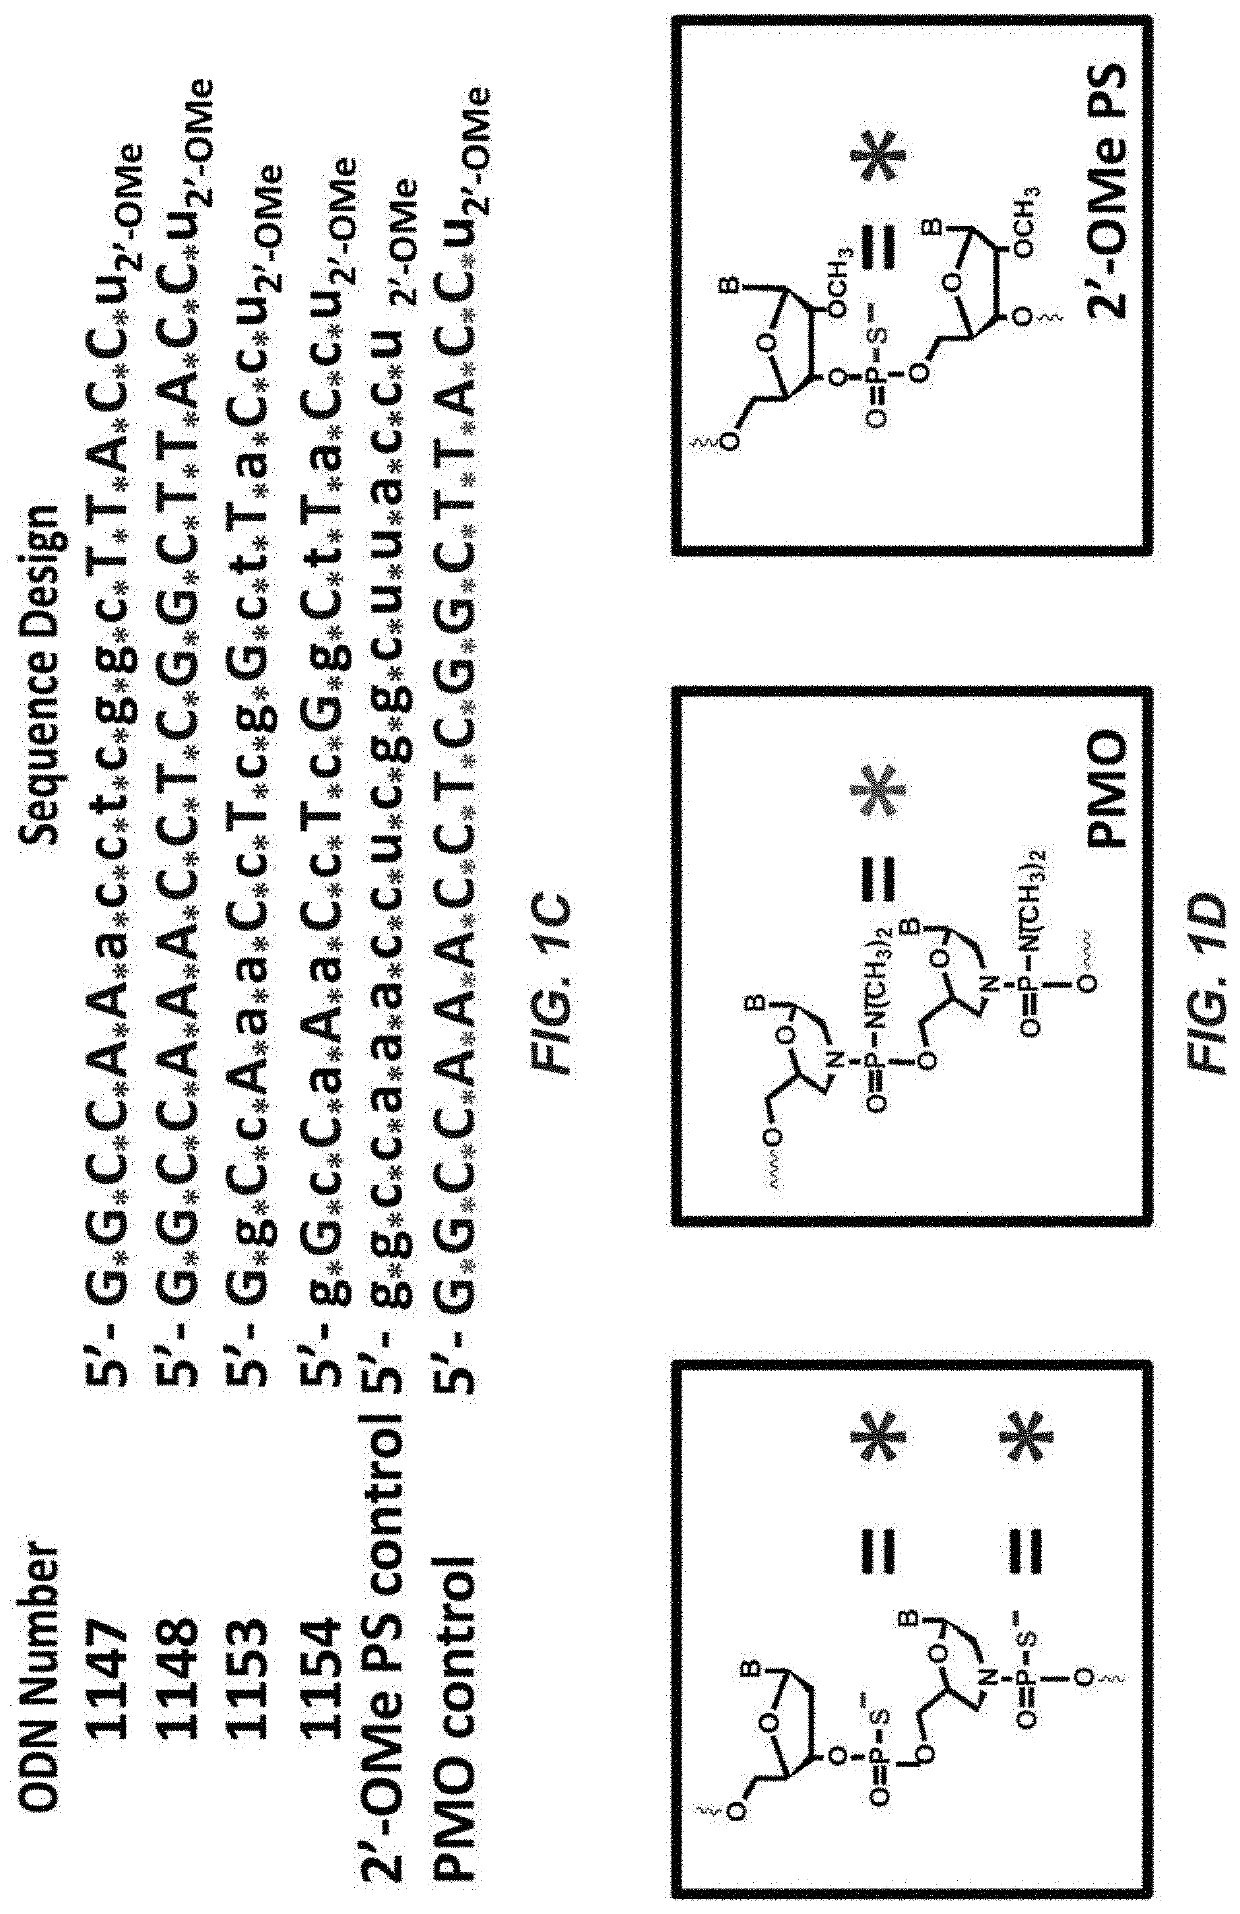 Thiomorpholino Oligonucleotides For The Treatment of Muscular Dystrophy